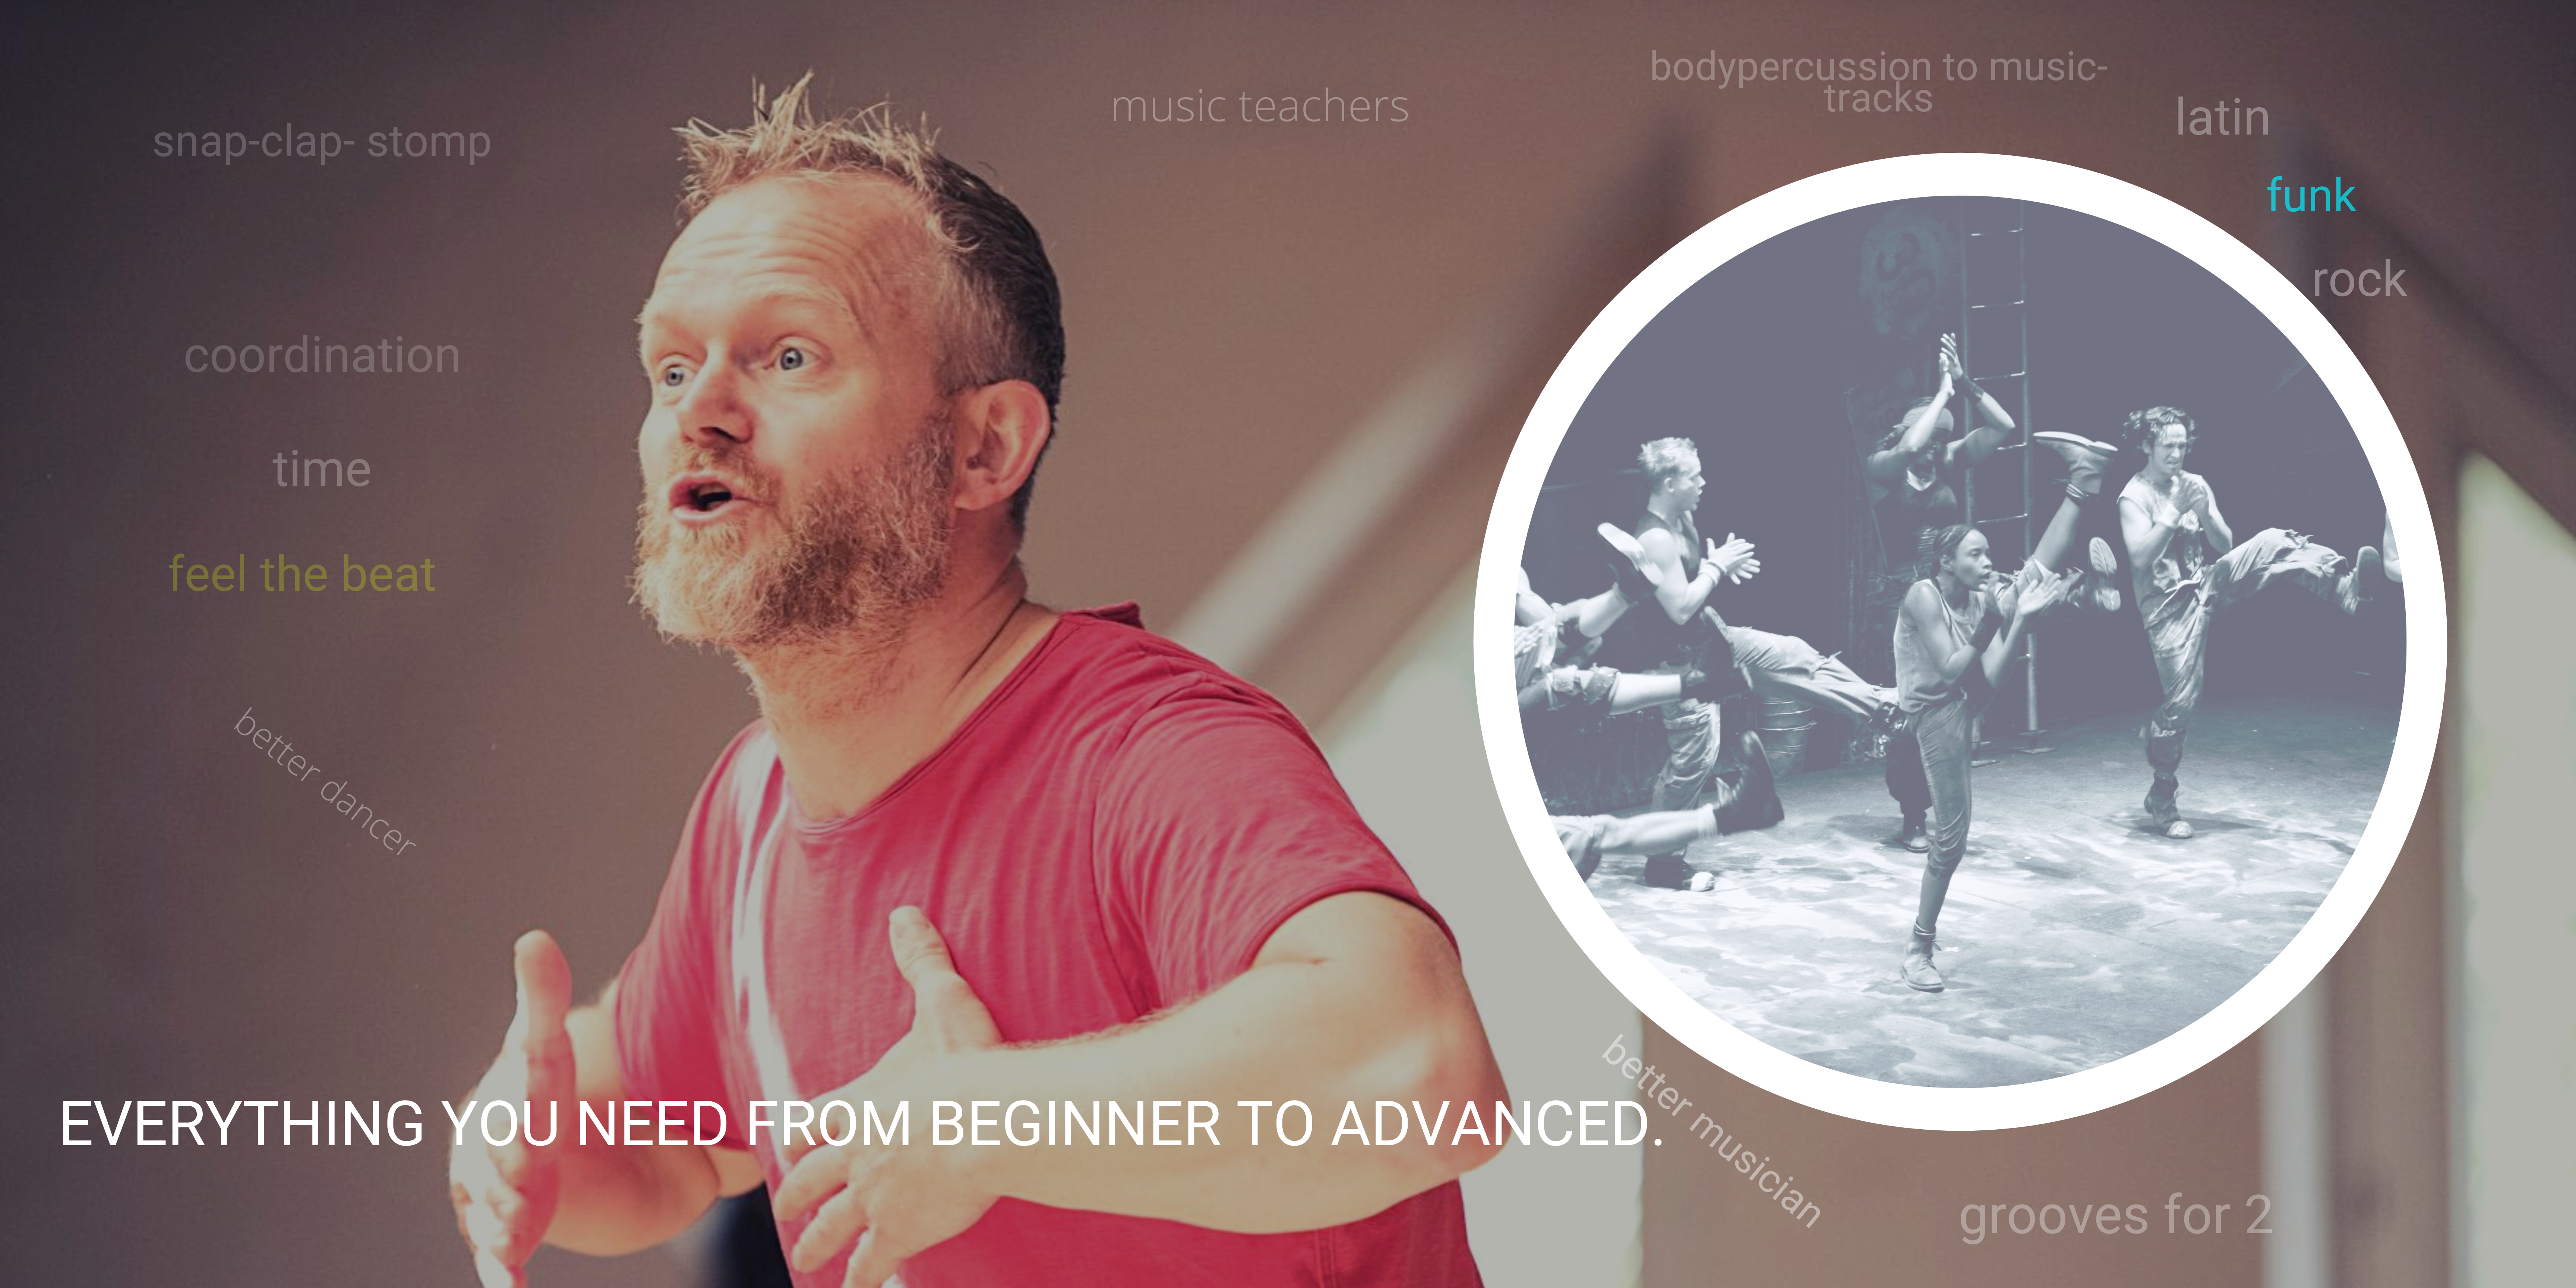 online bodypercussion courses